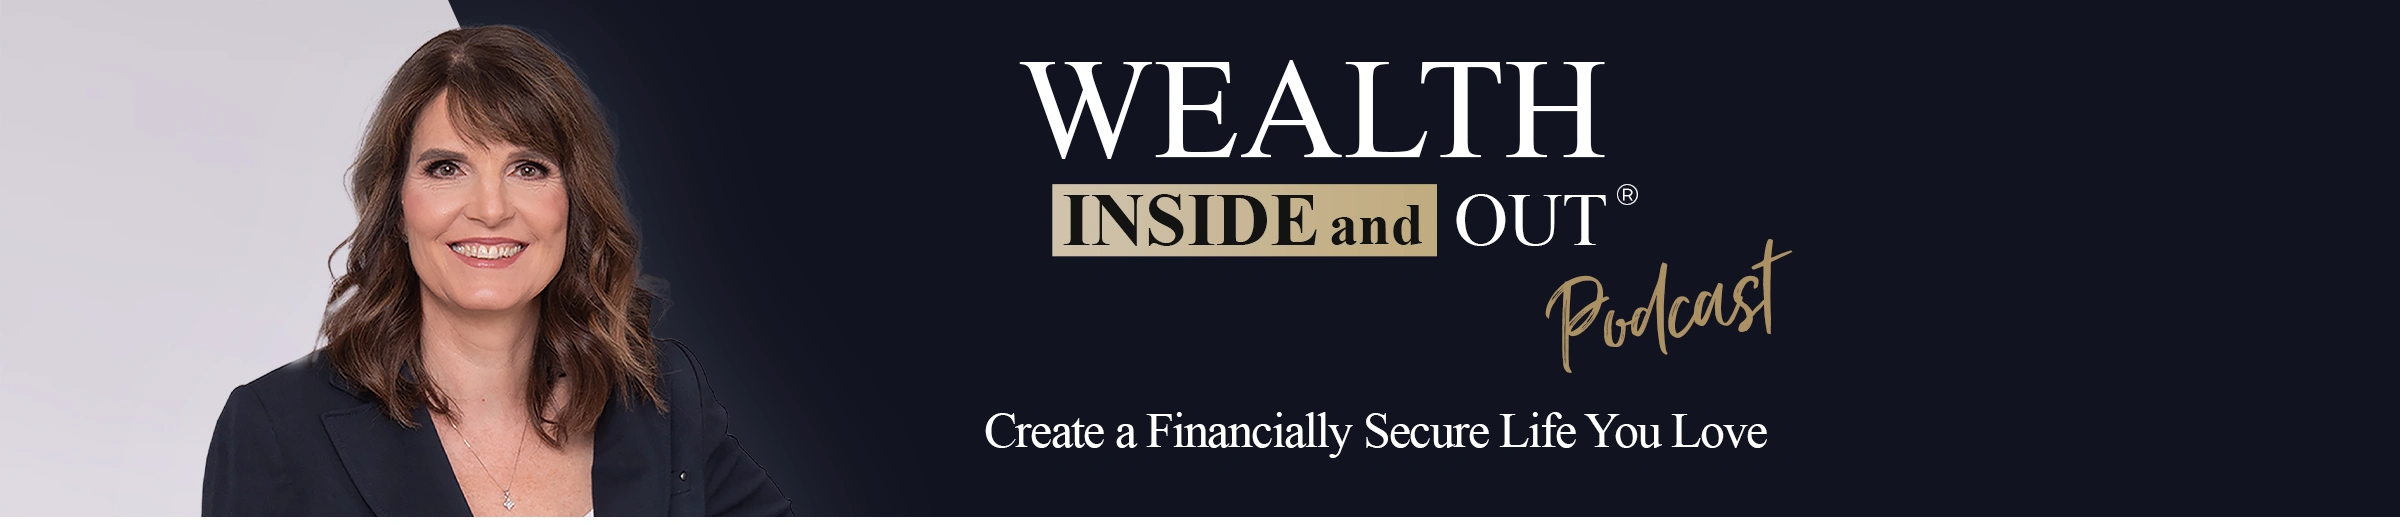 Wealth Inside and Out® Podcast Hero